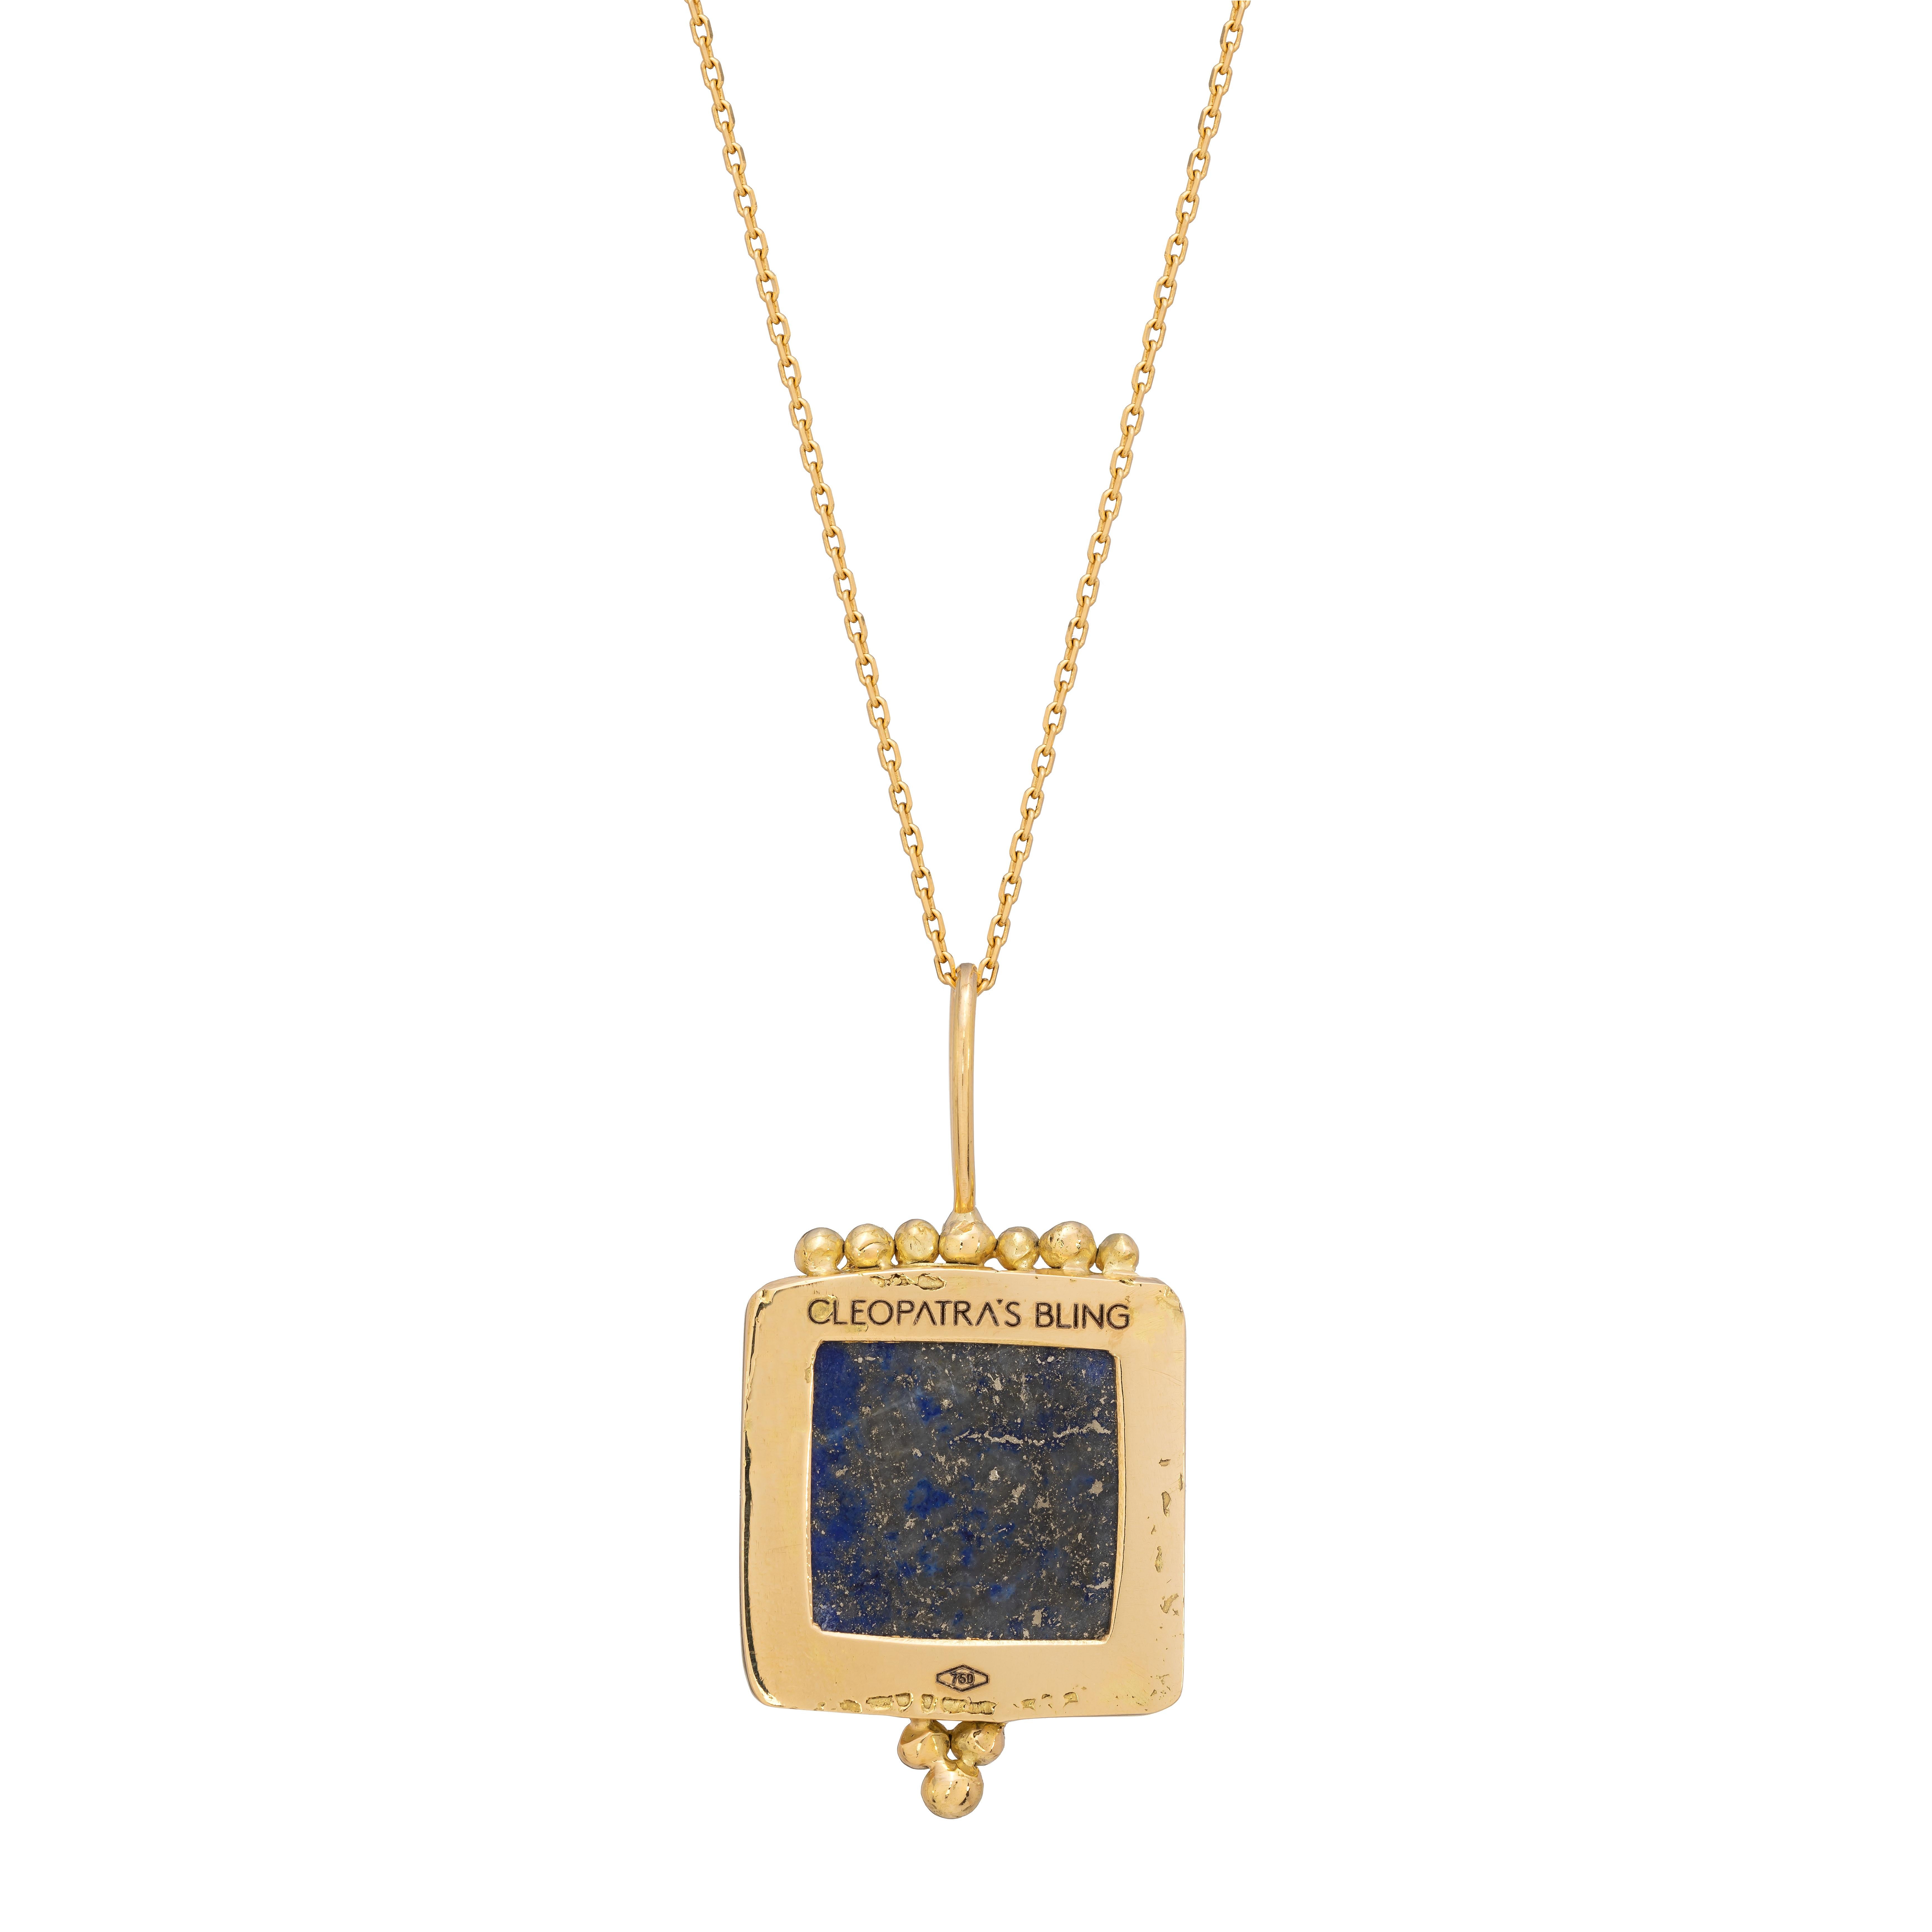 Melusine Pendant in Lapis Lazuli, 18 Karat Yellow Gold and Pink Diamond
The Relic Collection pieces are one off, hand etched pendants. Each stone is individually engraved by hand by artisans which means that every piece is truly one of a kind. These